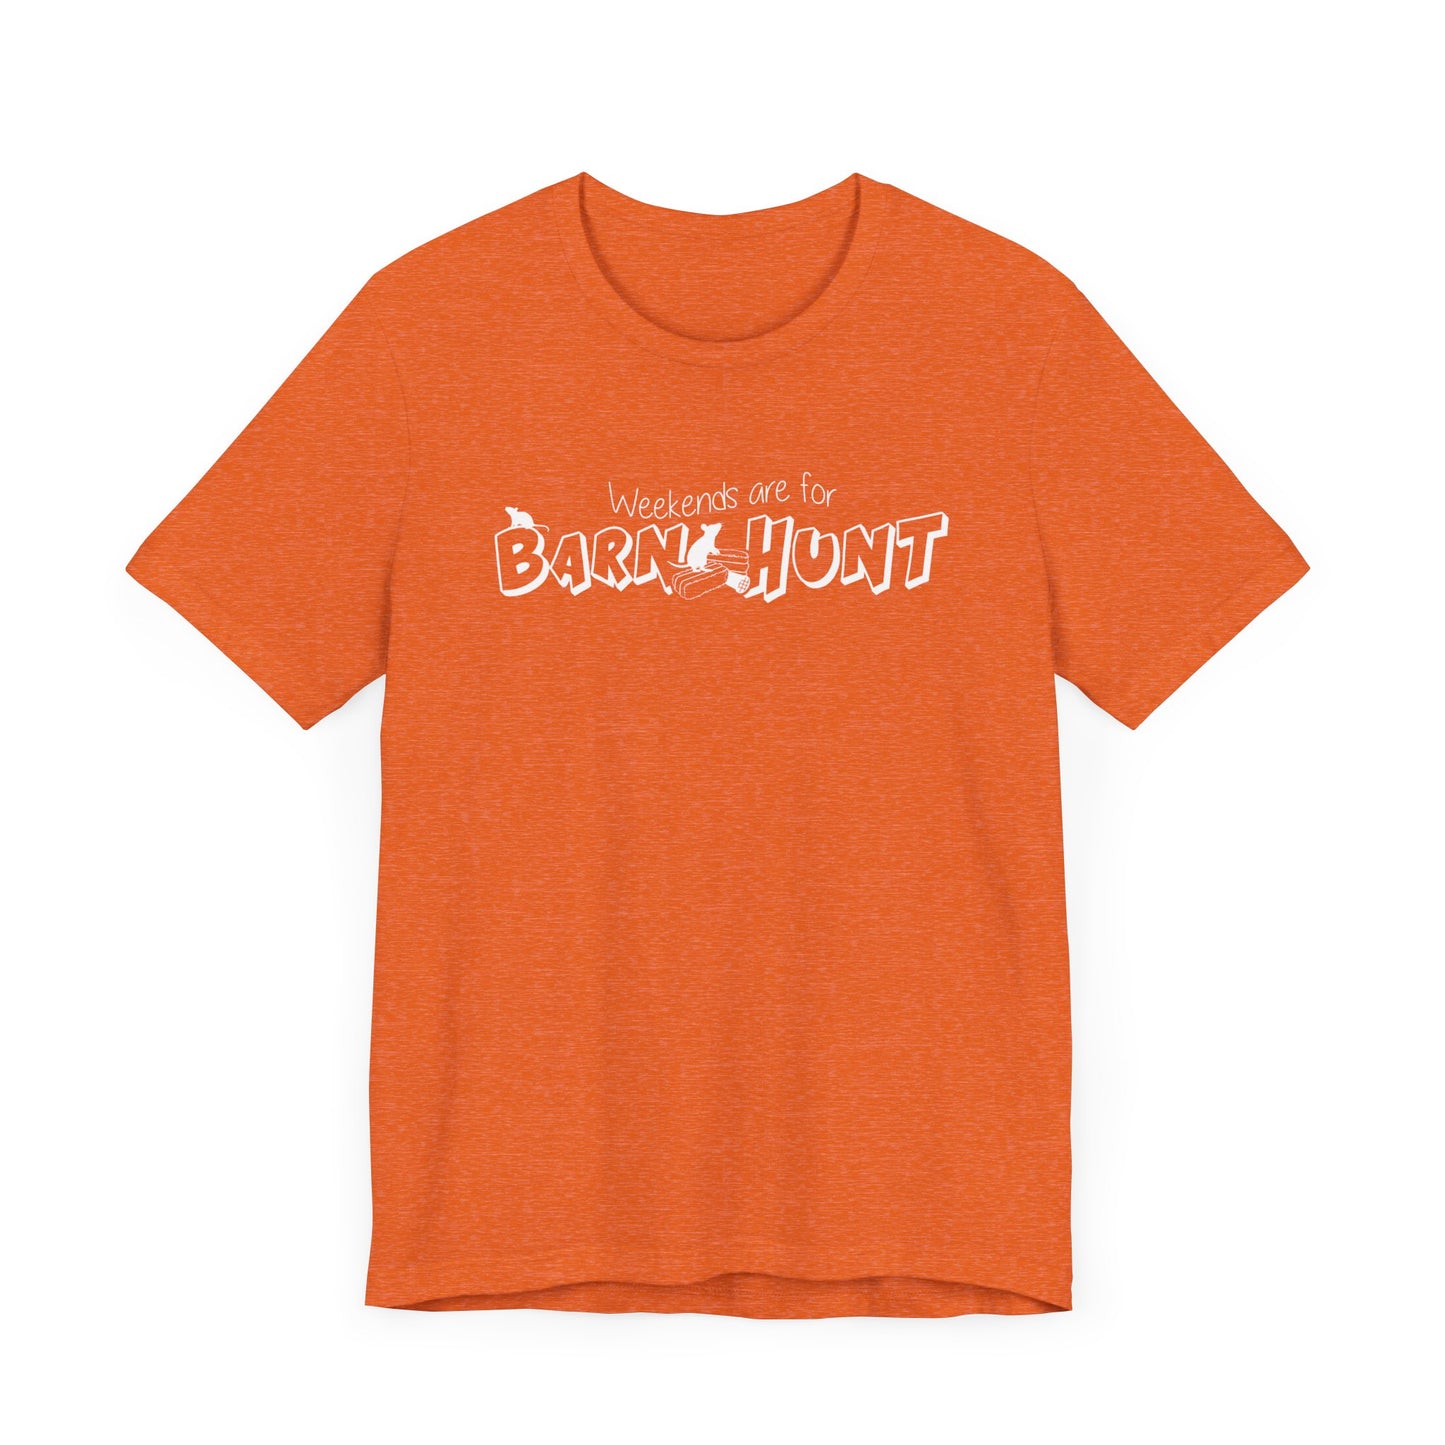 WEEKENDS ARE FOR  Unisex Jersey Short Sleeve Tee - BARN HUNT SHIRT